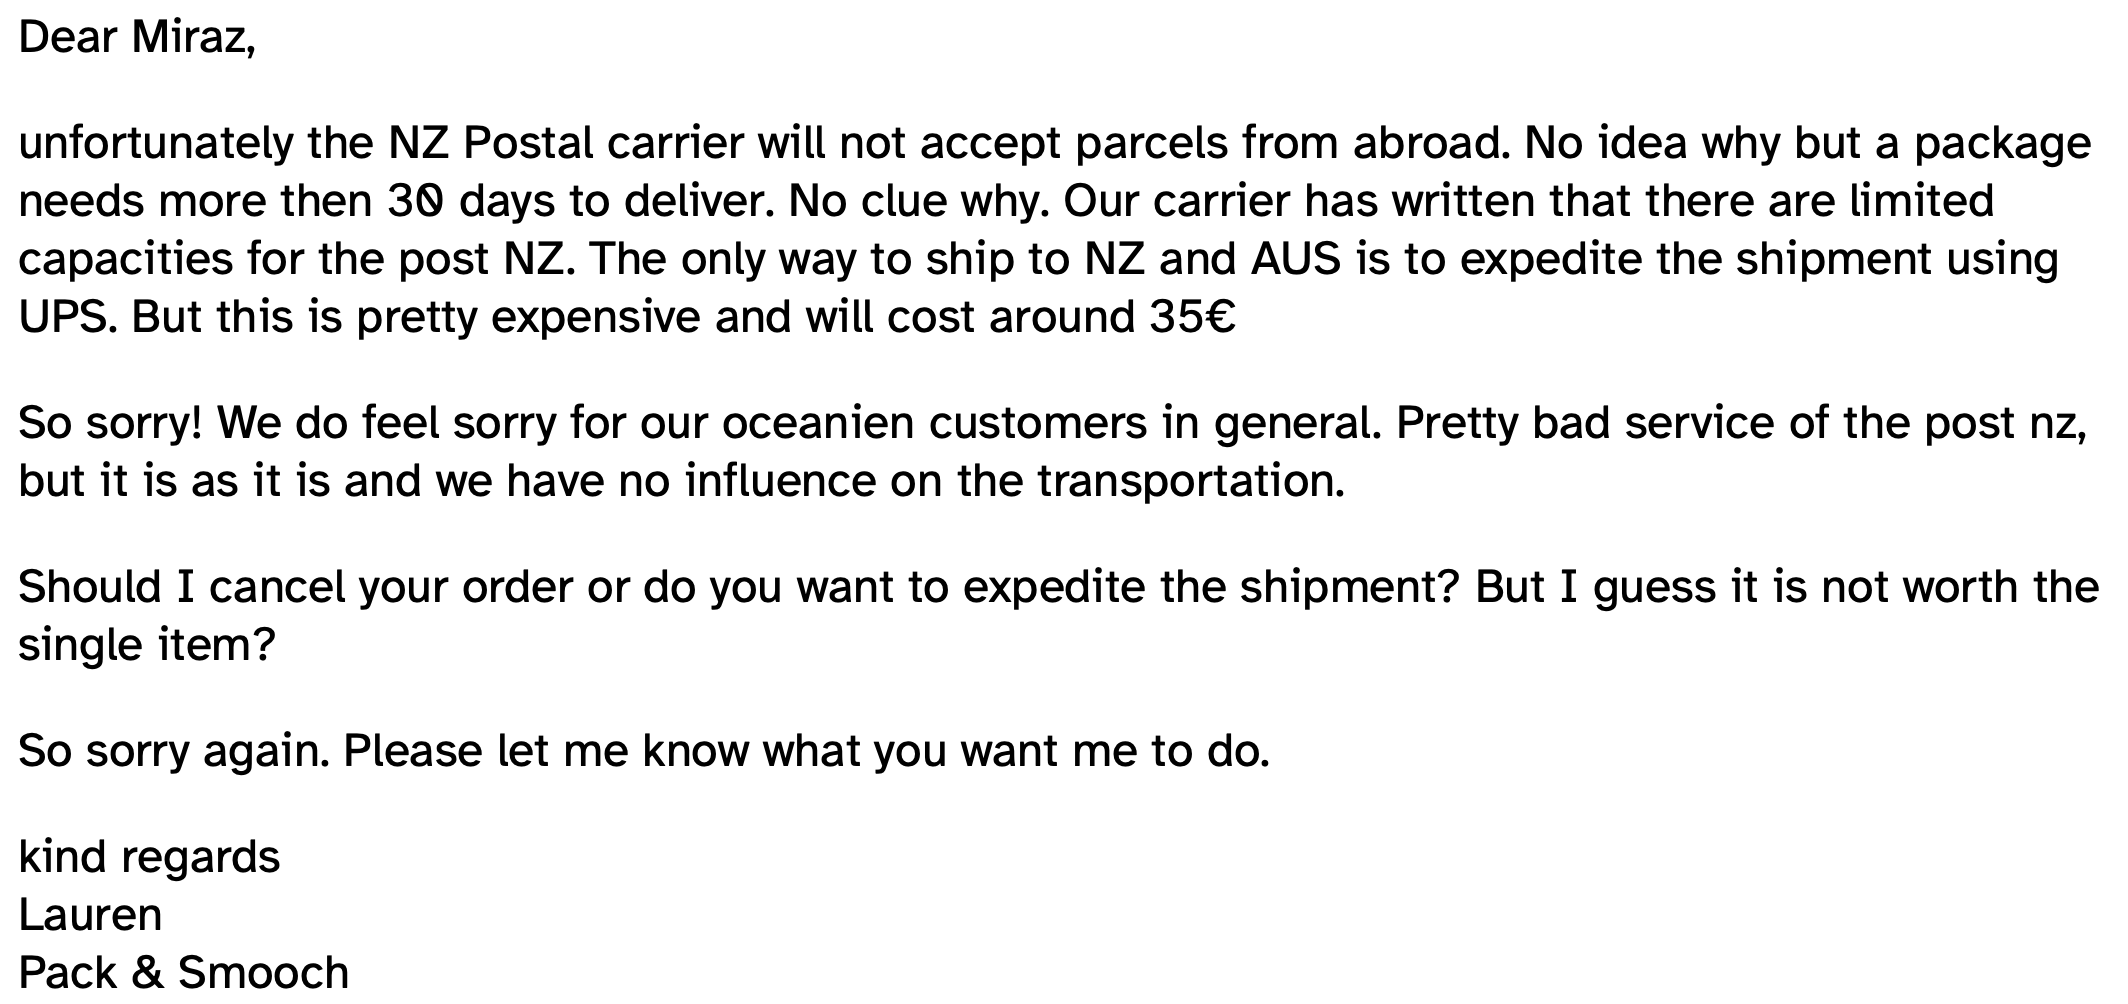 Email advising shipping not possible. 